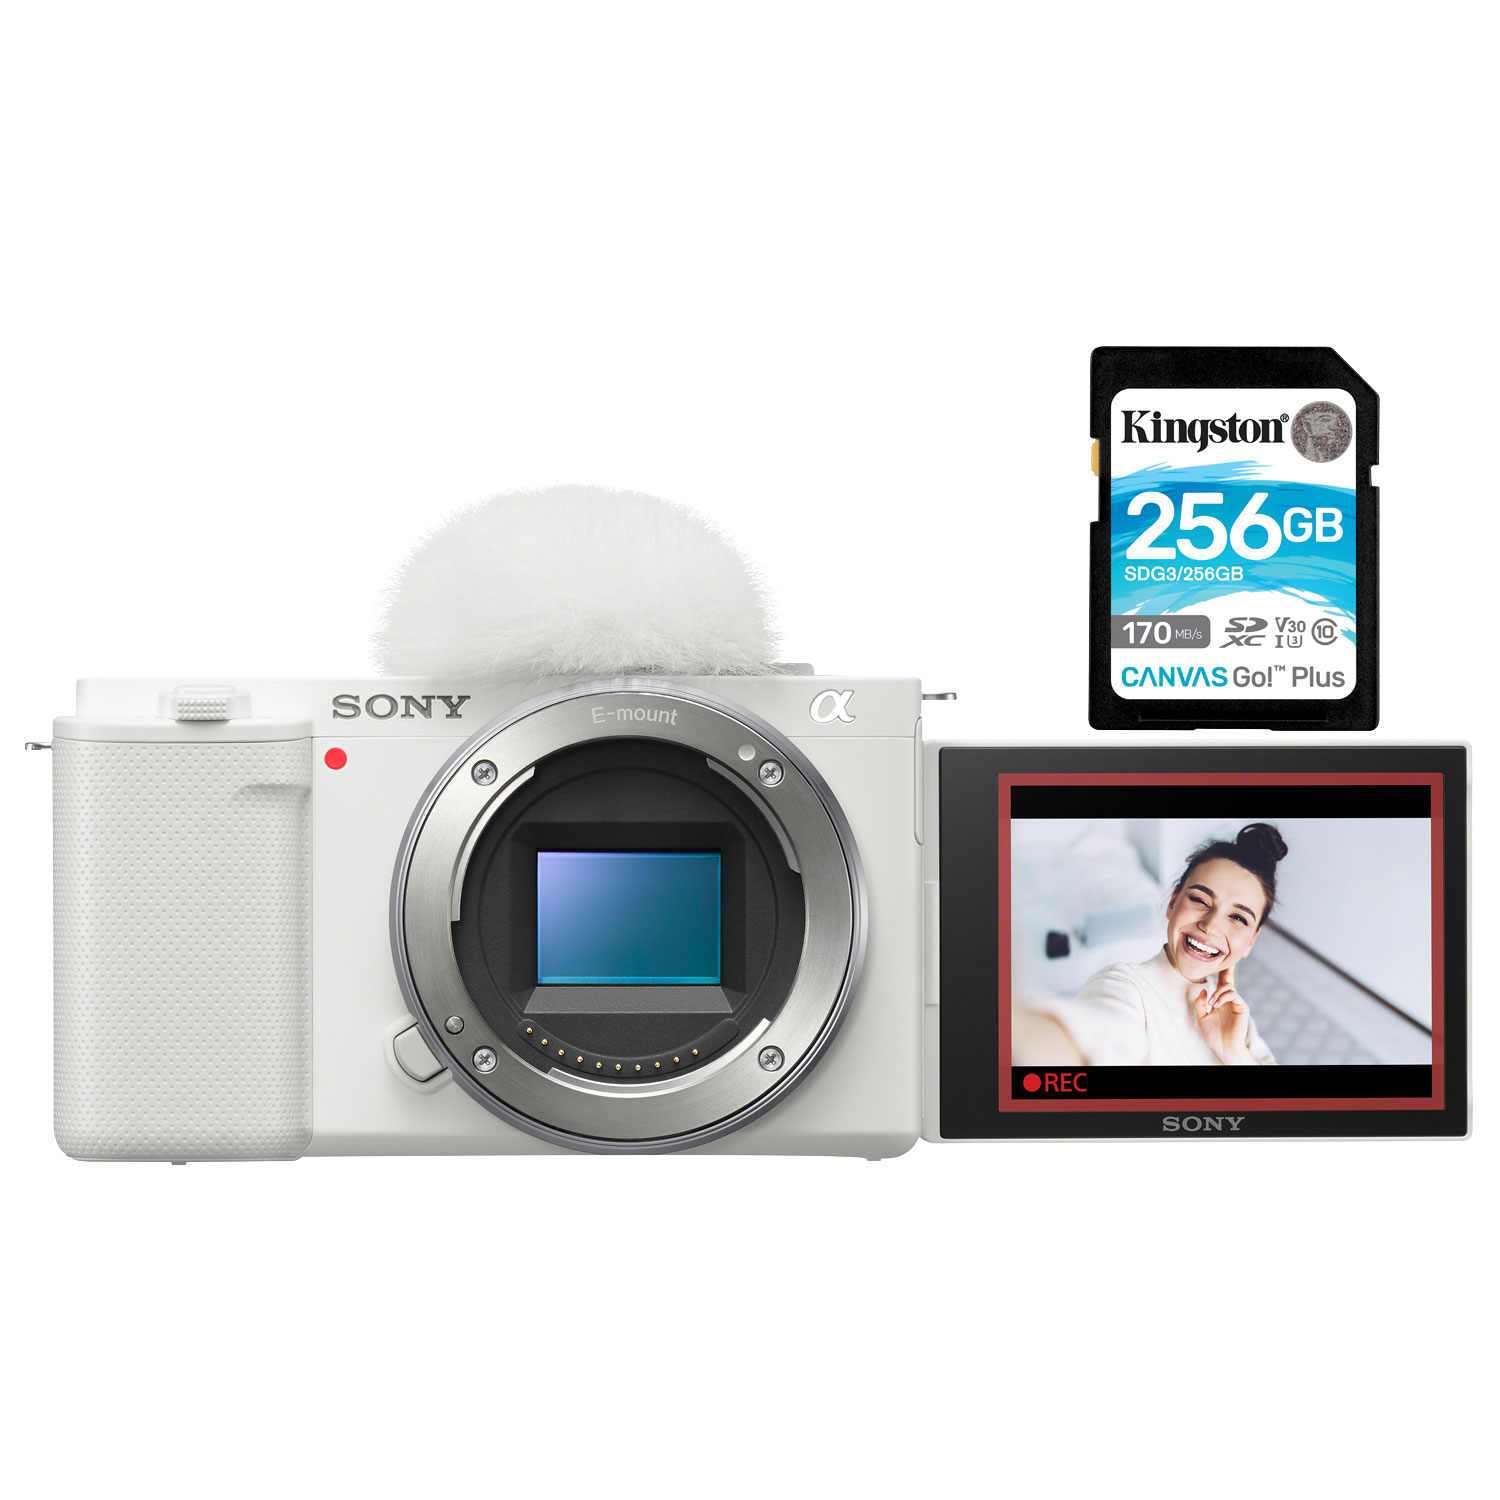 Sony Alpha ZV-E10 APS-C Interchangeable Lens Mirrorless Vlog Camera (Body Only) w/ 256GB 170MB/s SDXC Memory Card -White